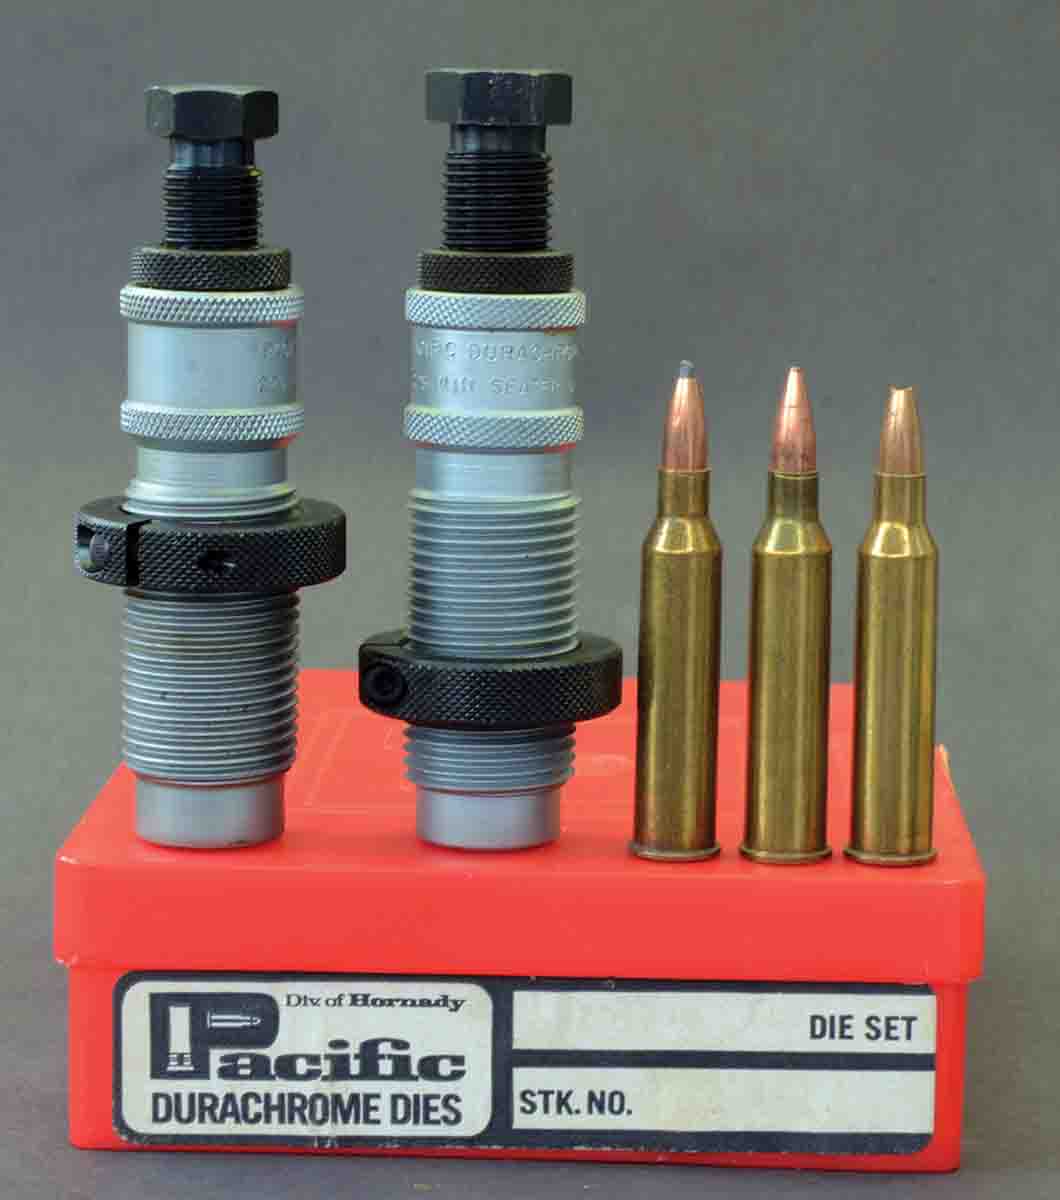 This set of Pacific dies was bought when purchasing three “blowout special” Model 70s in .225 Winchester at a gun show in 1968.